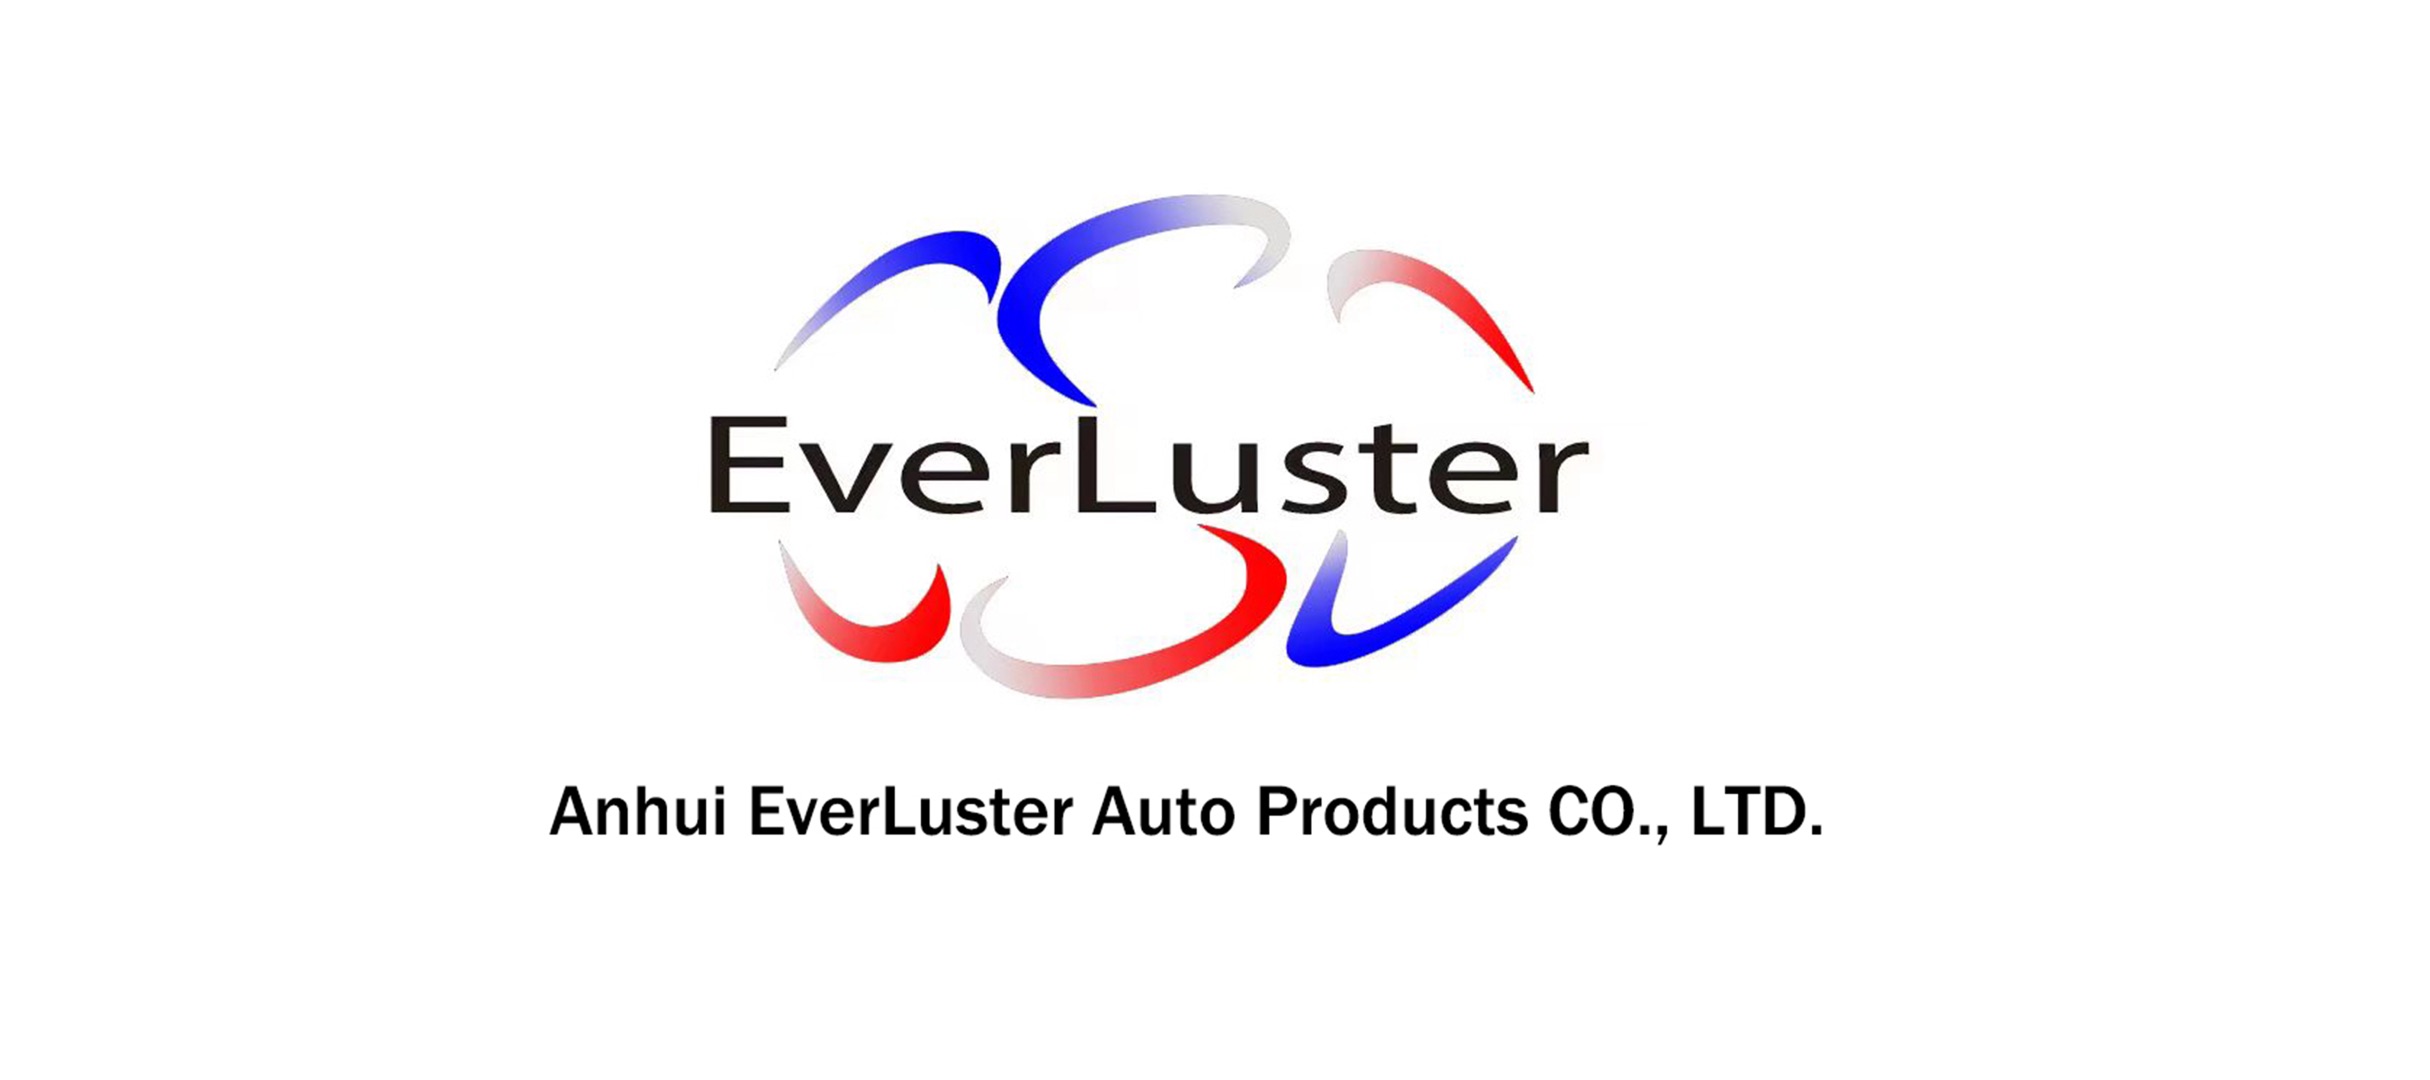 Anhui EverLuster Auto Products CO., LTD.